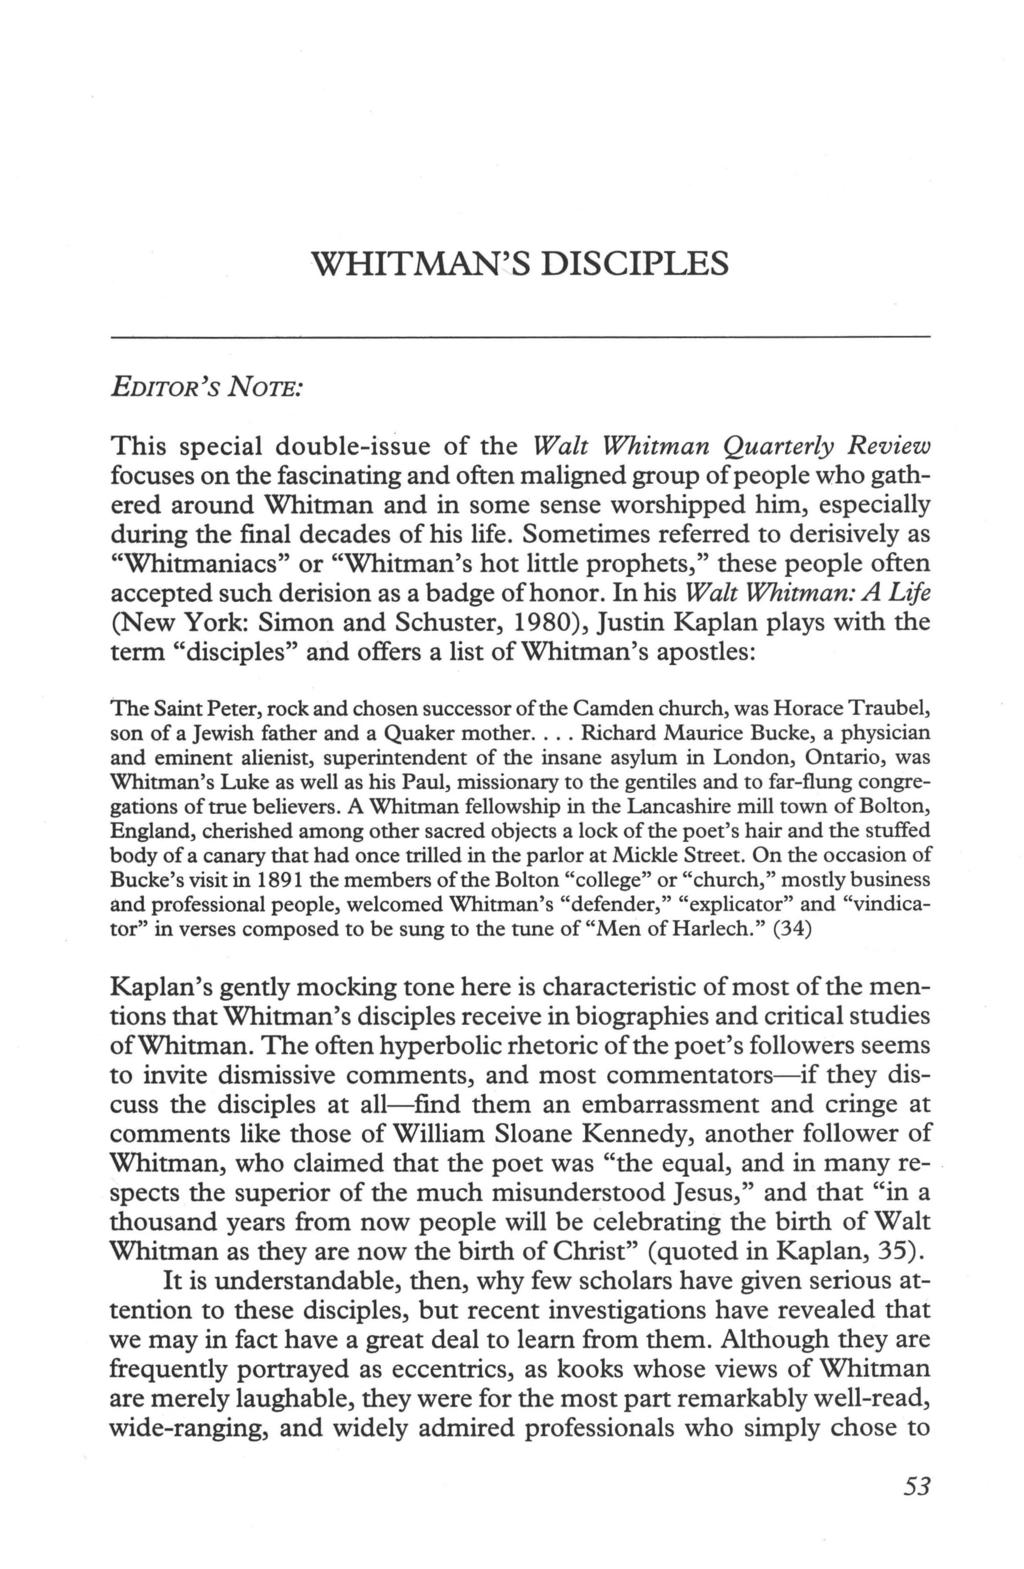 WHITMAN'S DISCIPLES EDITOR 's NOTE: This special double-issue of the Walt Whitman Quarterly Review focuses on the fascinating and often maligned group of people who gathered around Whitman and in